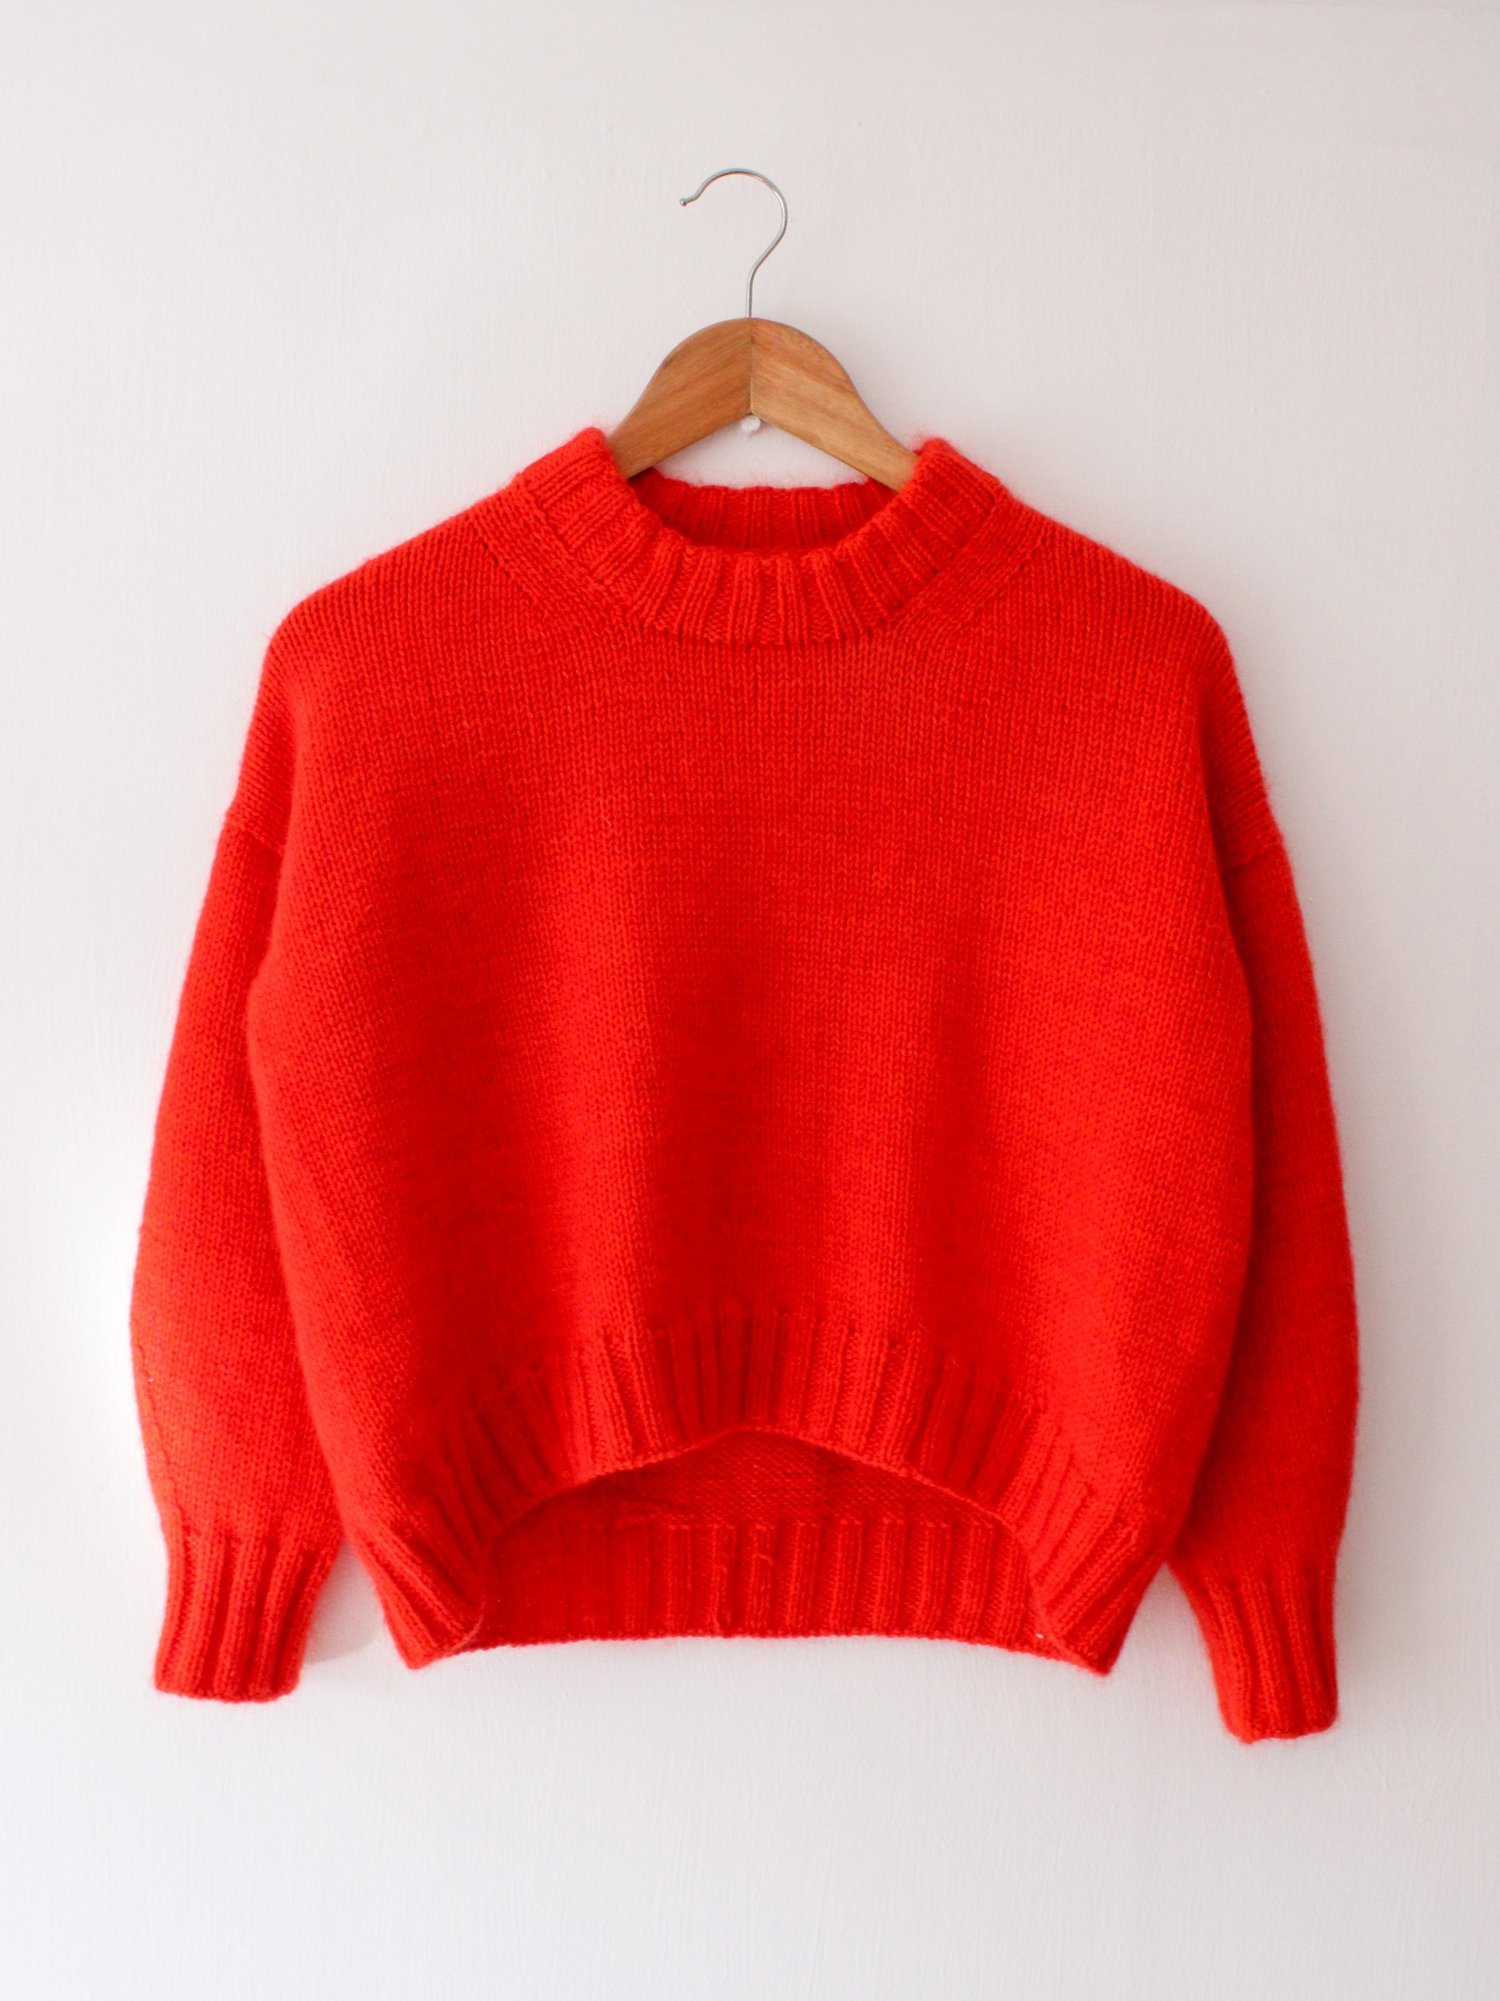 Cove Sweater — The Knit Purl Girl